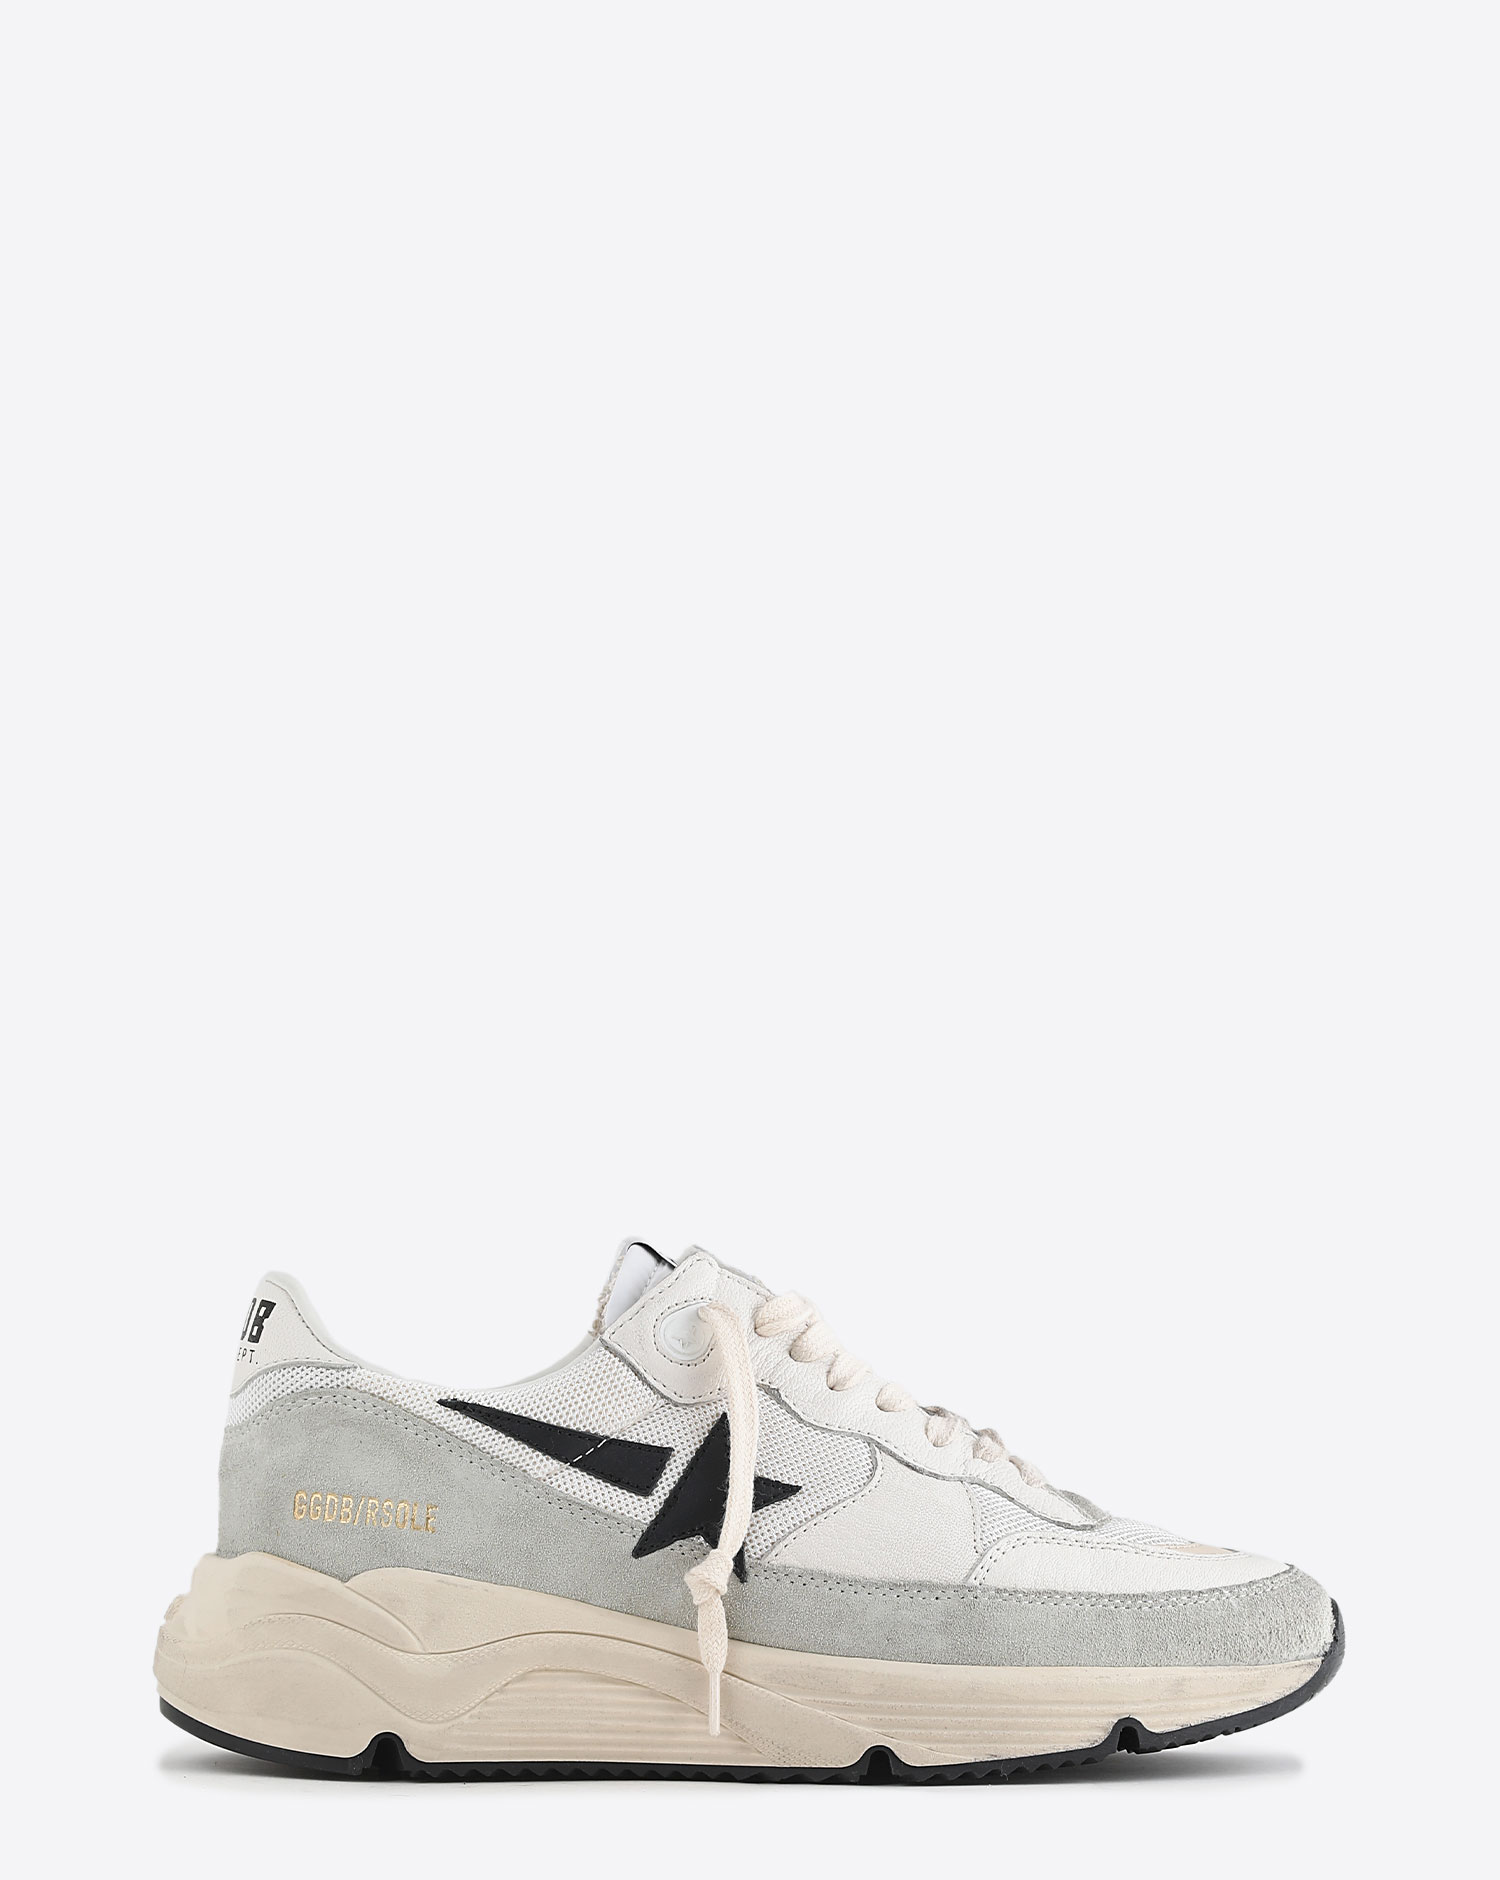 Golden Goose Homme Sneakers Running Sole – White Ivory Black 11199